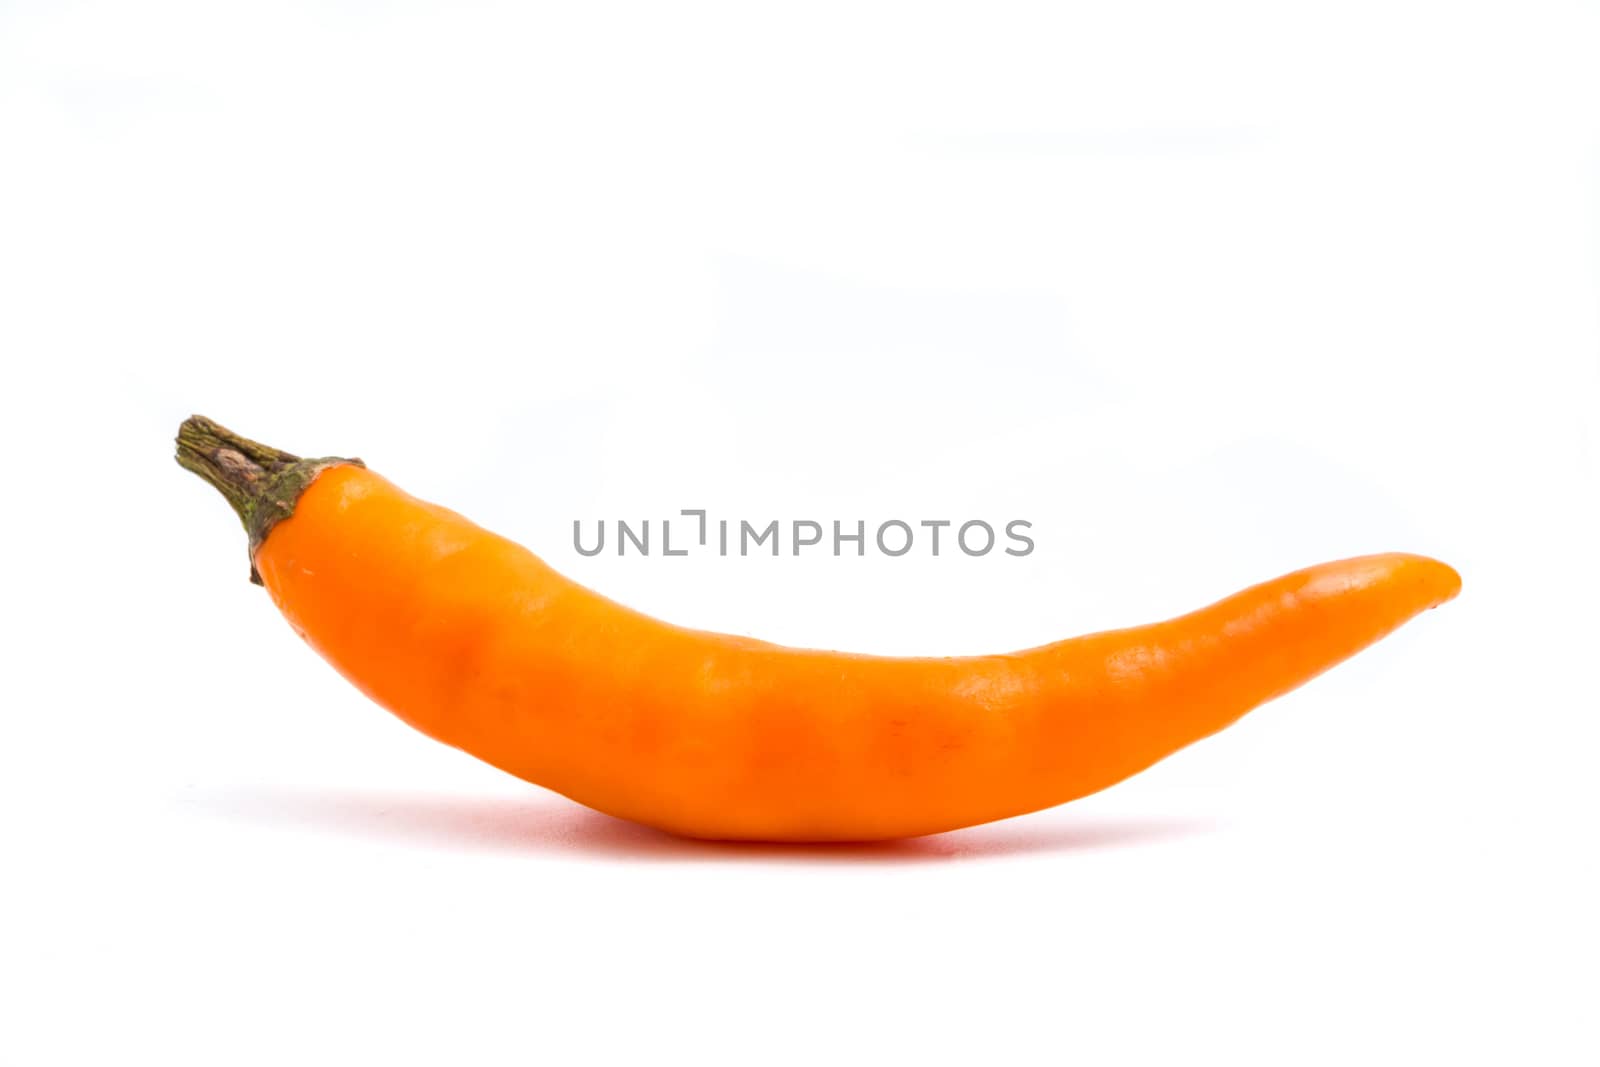 Fresh Yellow chili papper on white background.